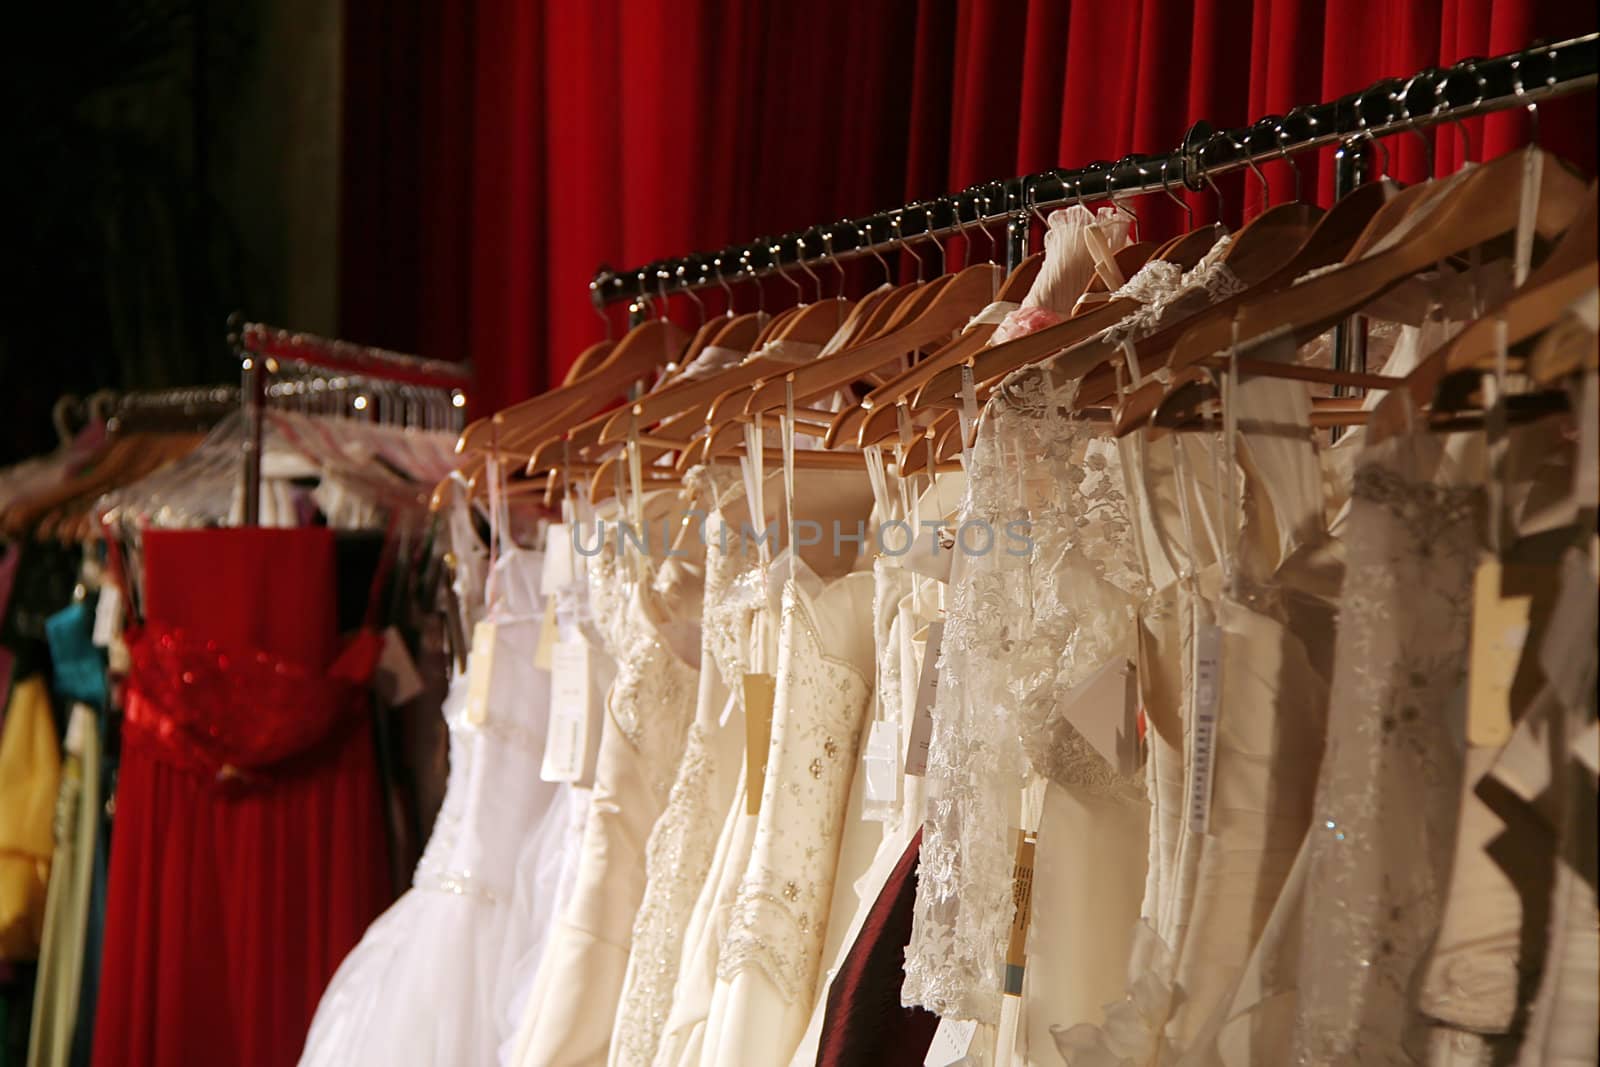 the dress of the bride on a hanger